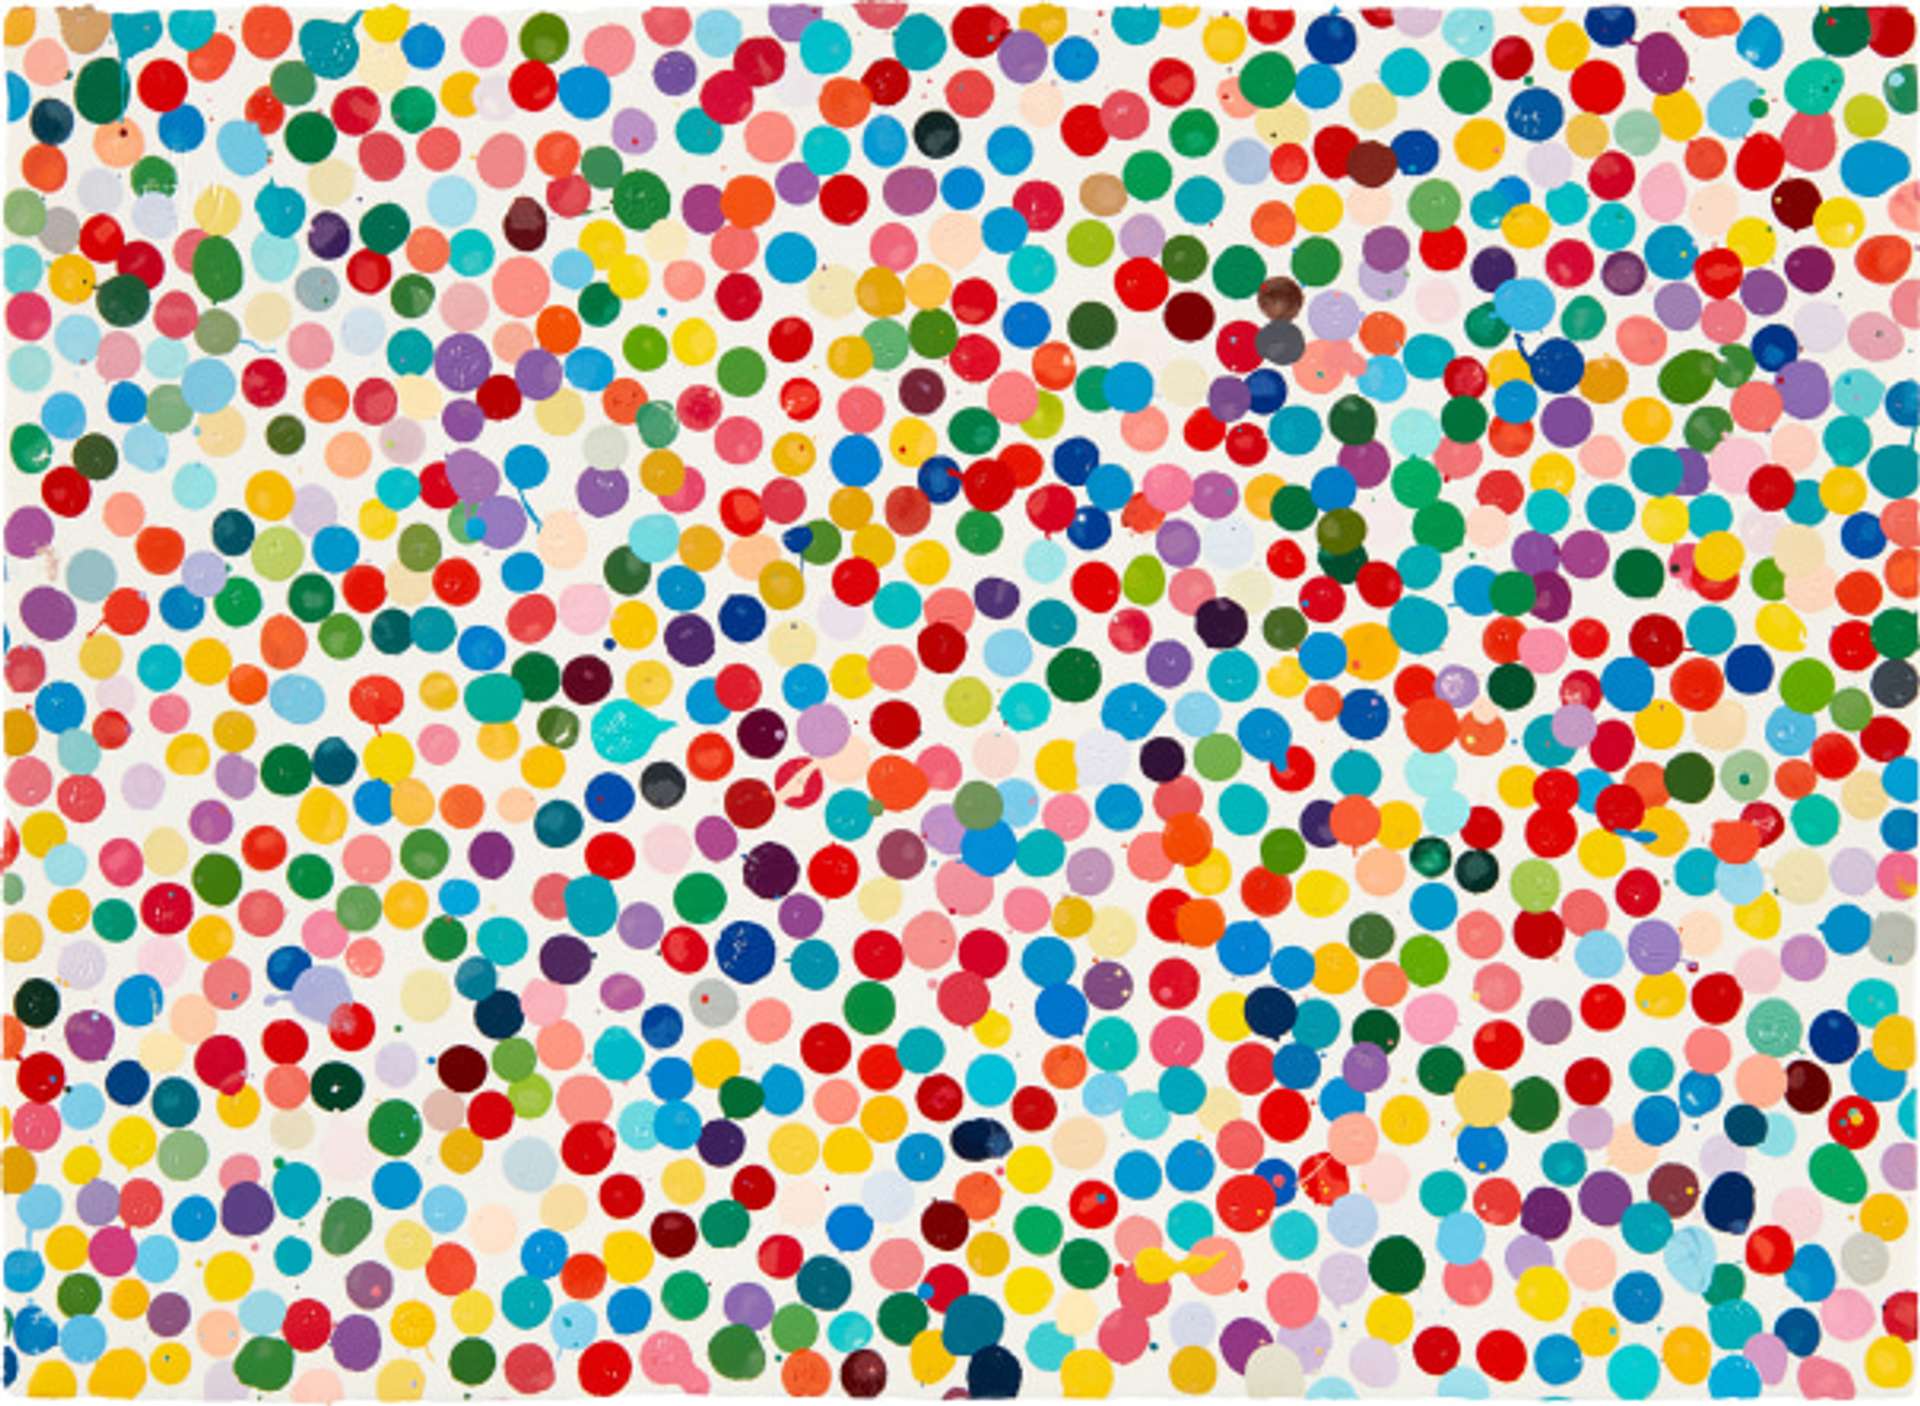 Thousands of small multicoloured paint dots covering the surface of a sheet